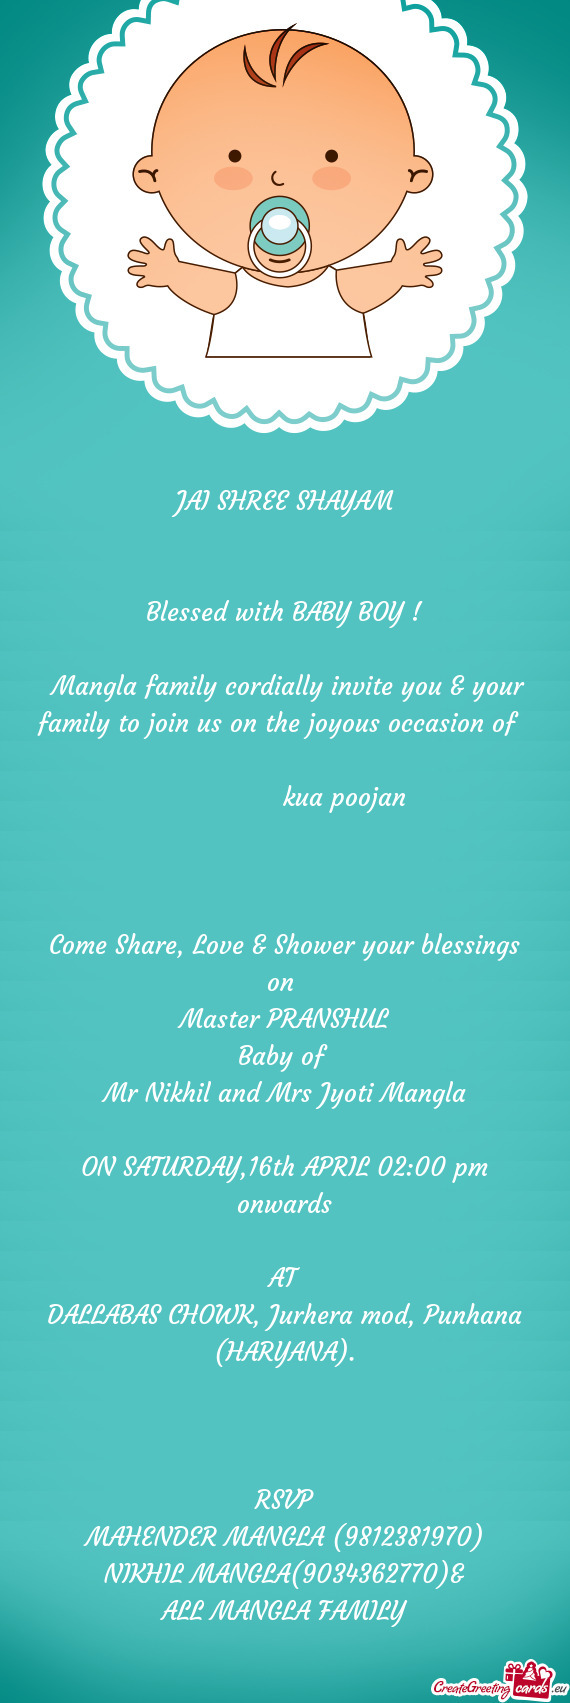 Mangla family cordially invite you & your family to join us on the joyous occasion of